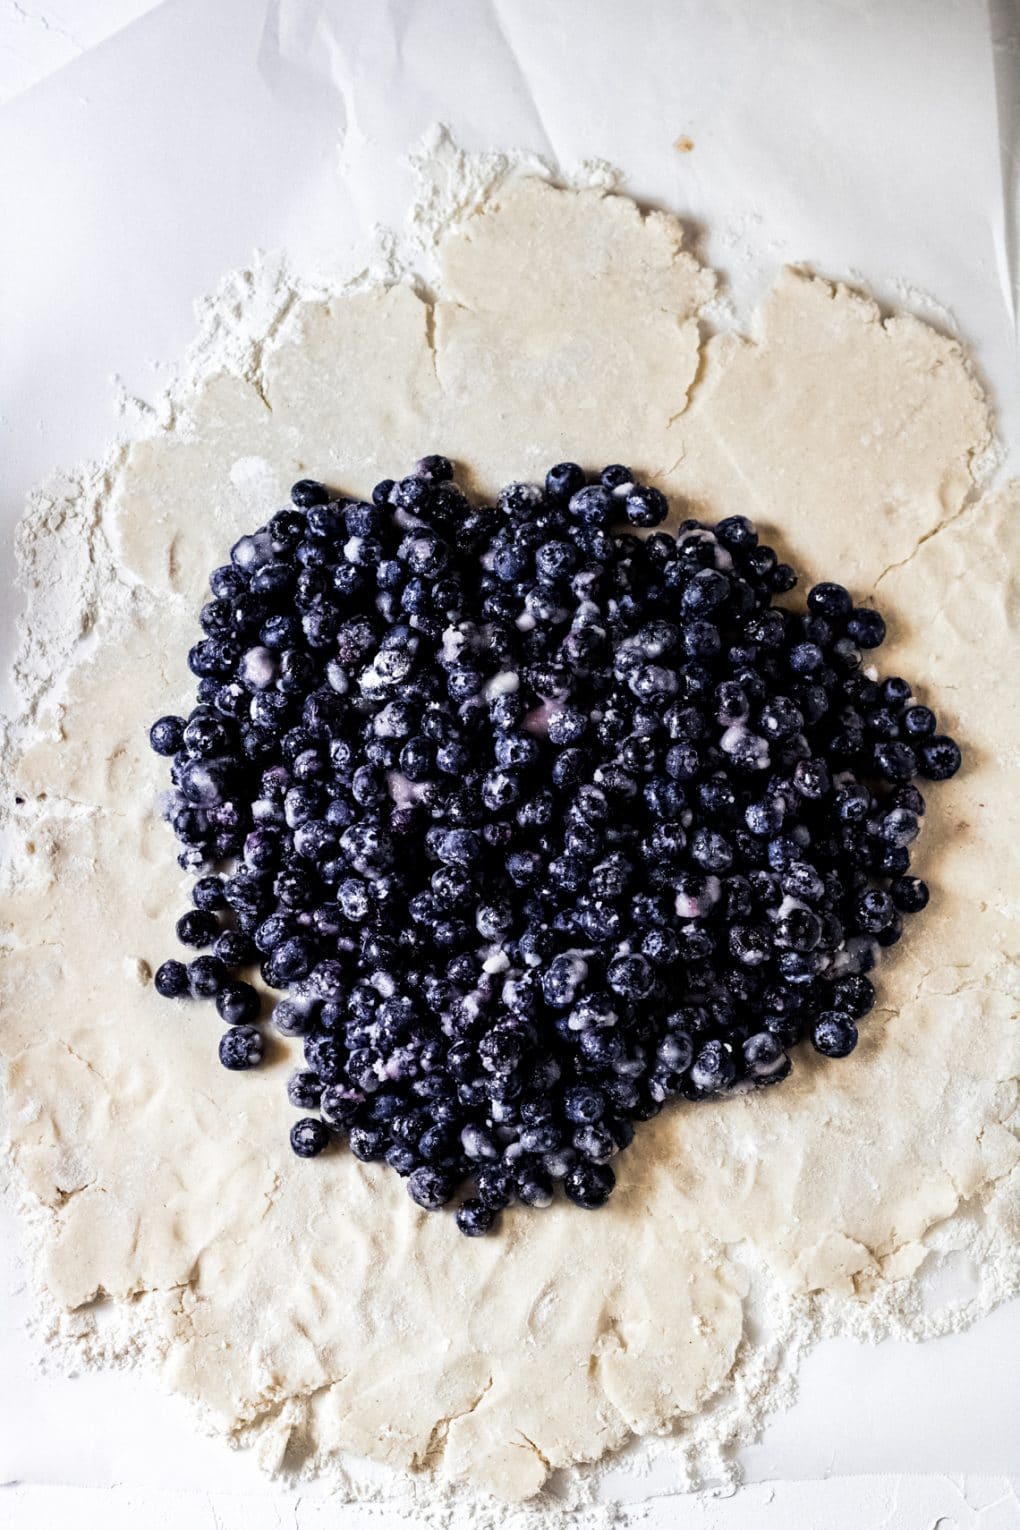 galette dough rolled out with the blueberry filling in the center